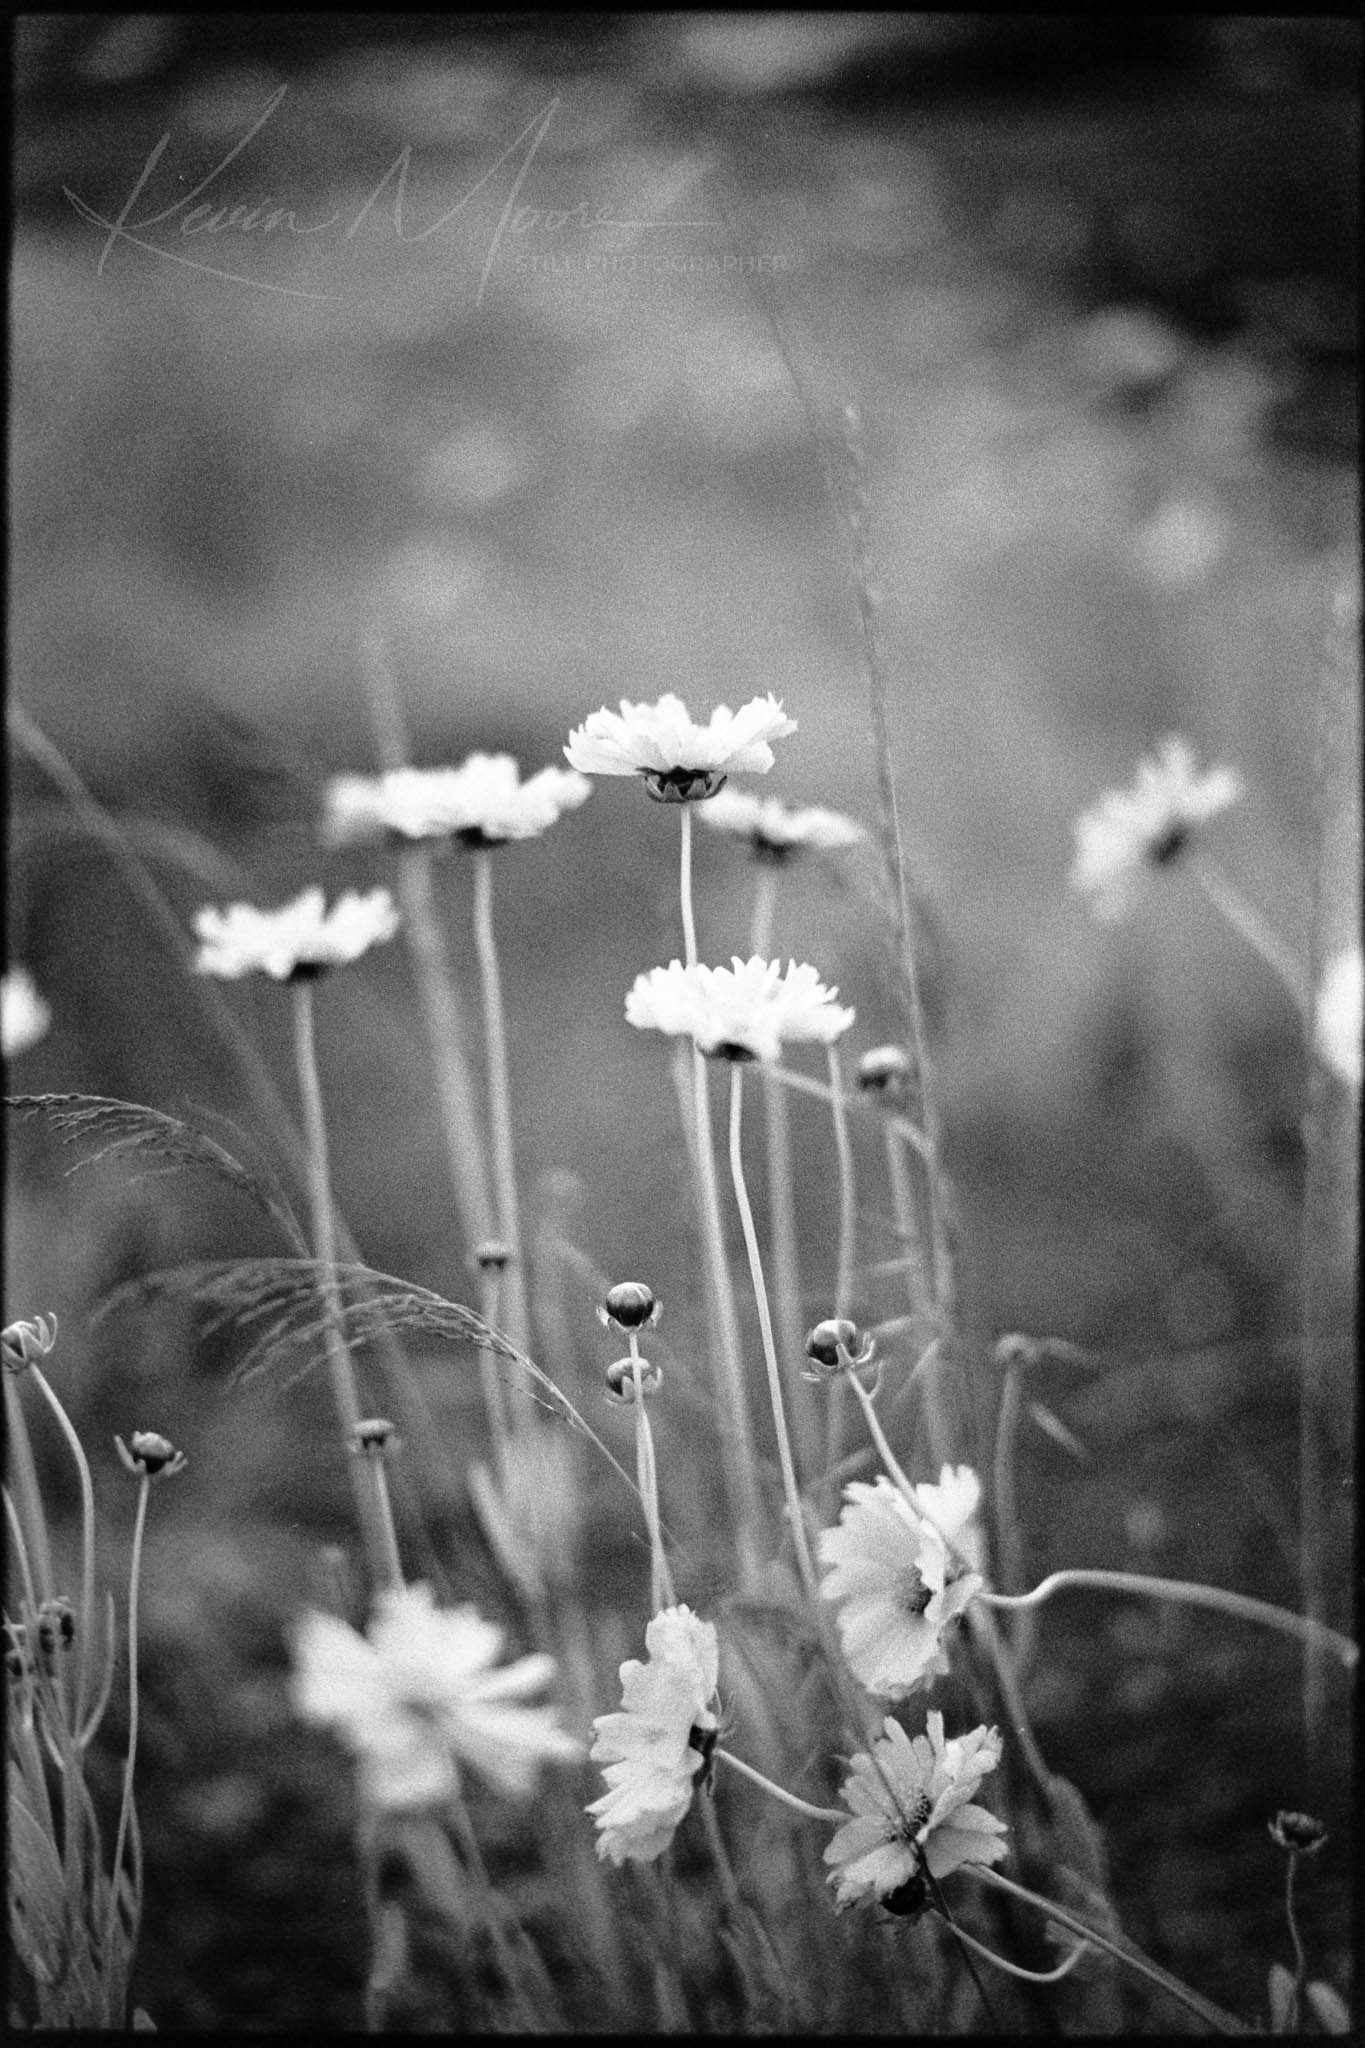 Monochrome image of daisy-like wildflowers swaying gently in diffused natural light, creating a serene ambiance.